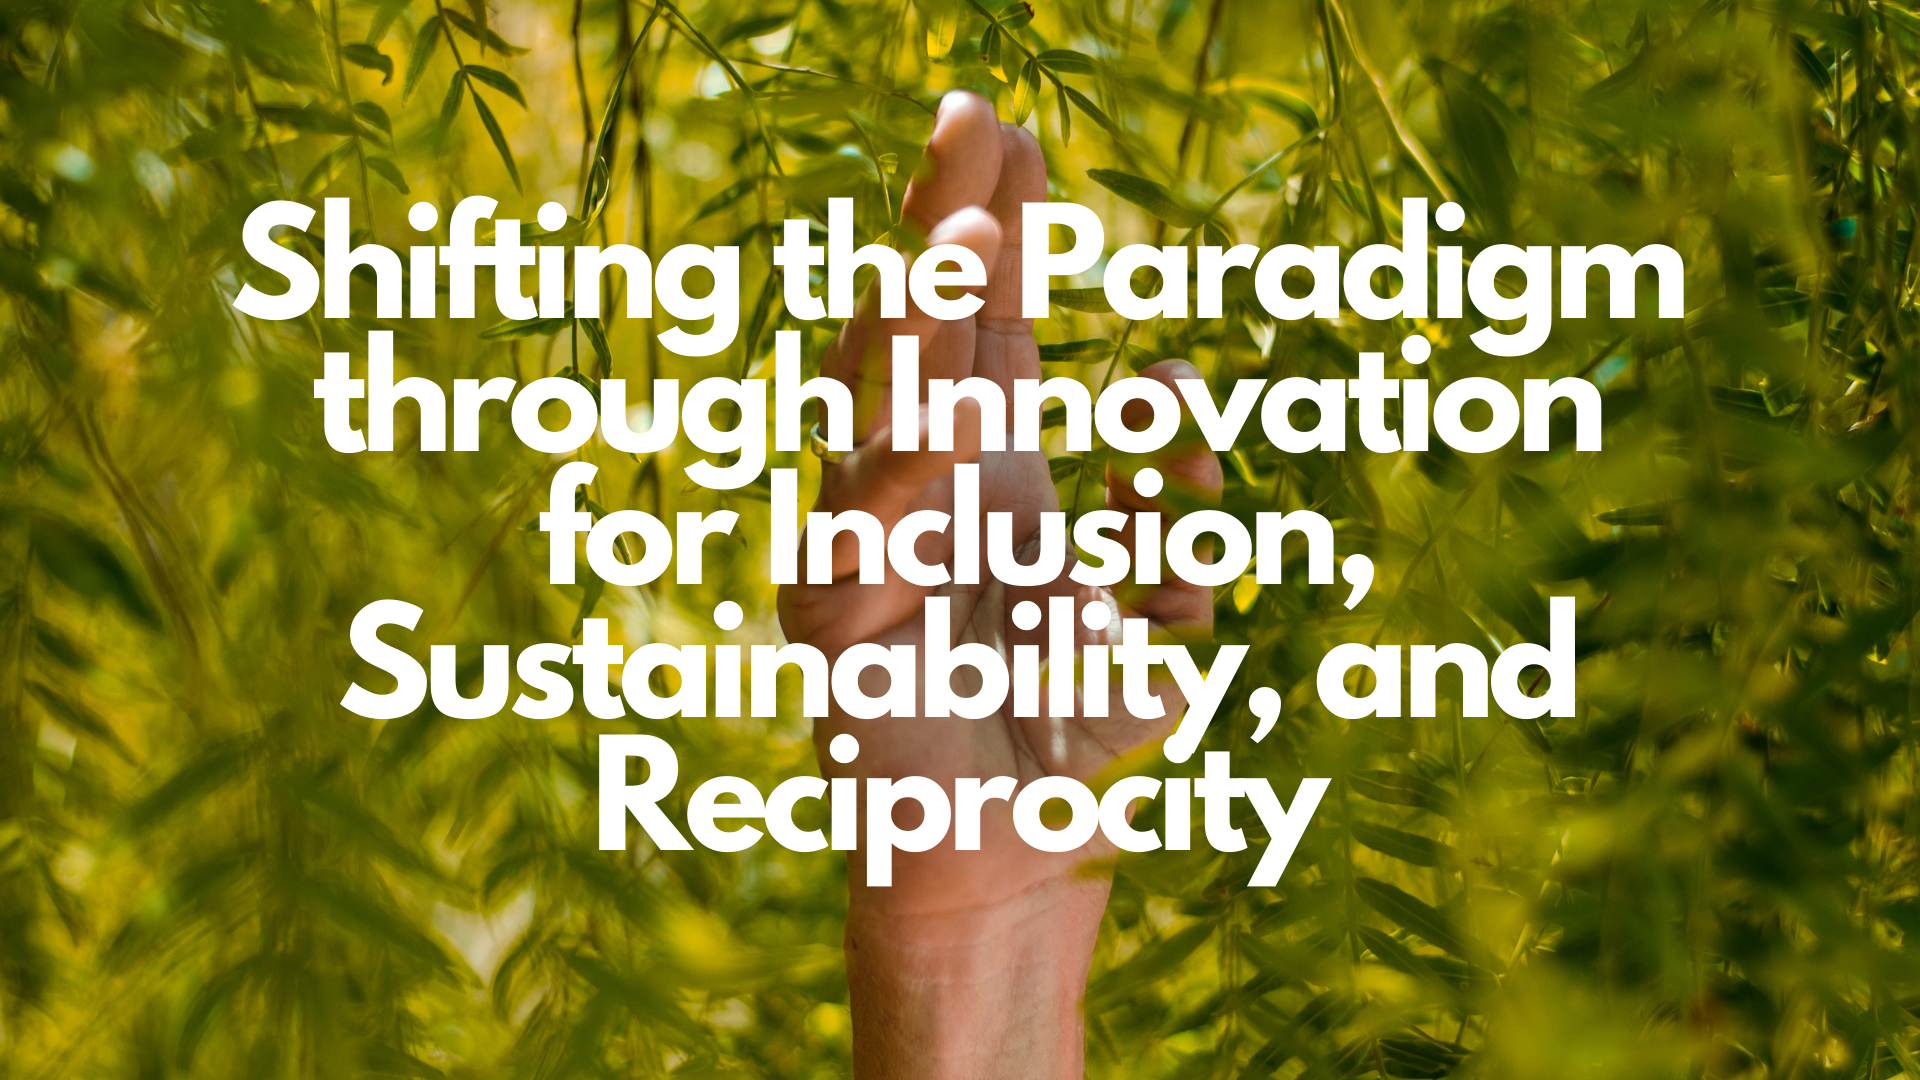 Shifting the Paradigm through Innovation for Inclusion, Sustainability, and Reciprocity (4).png